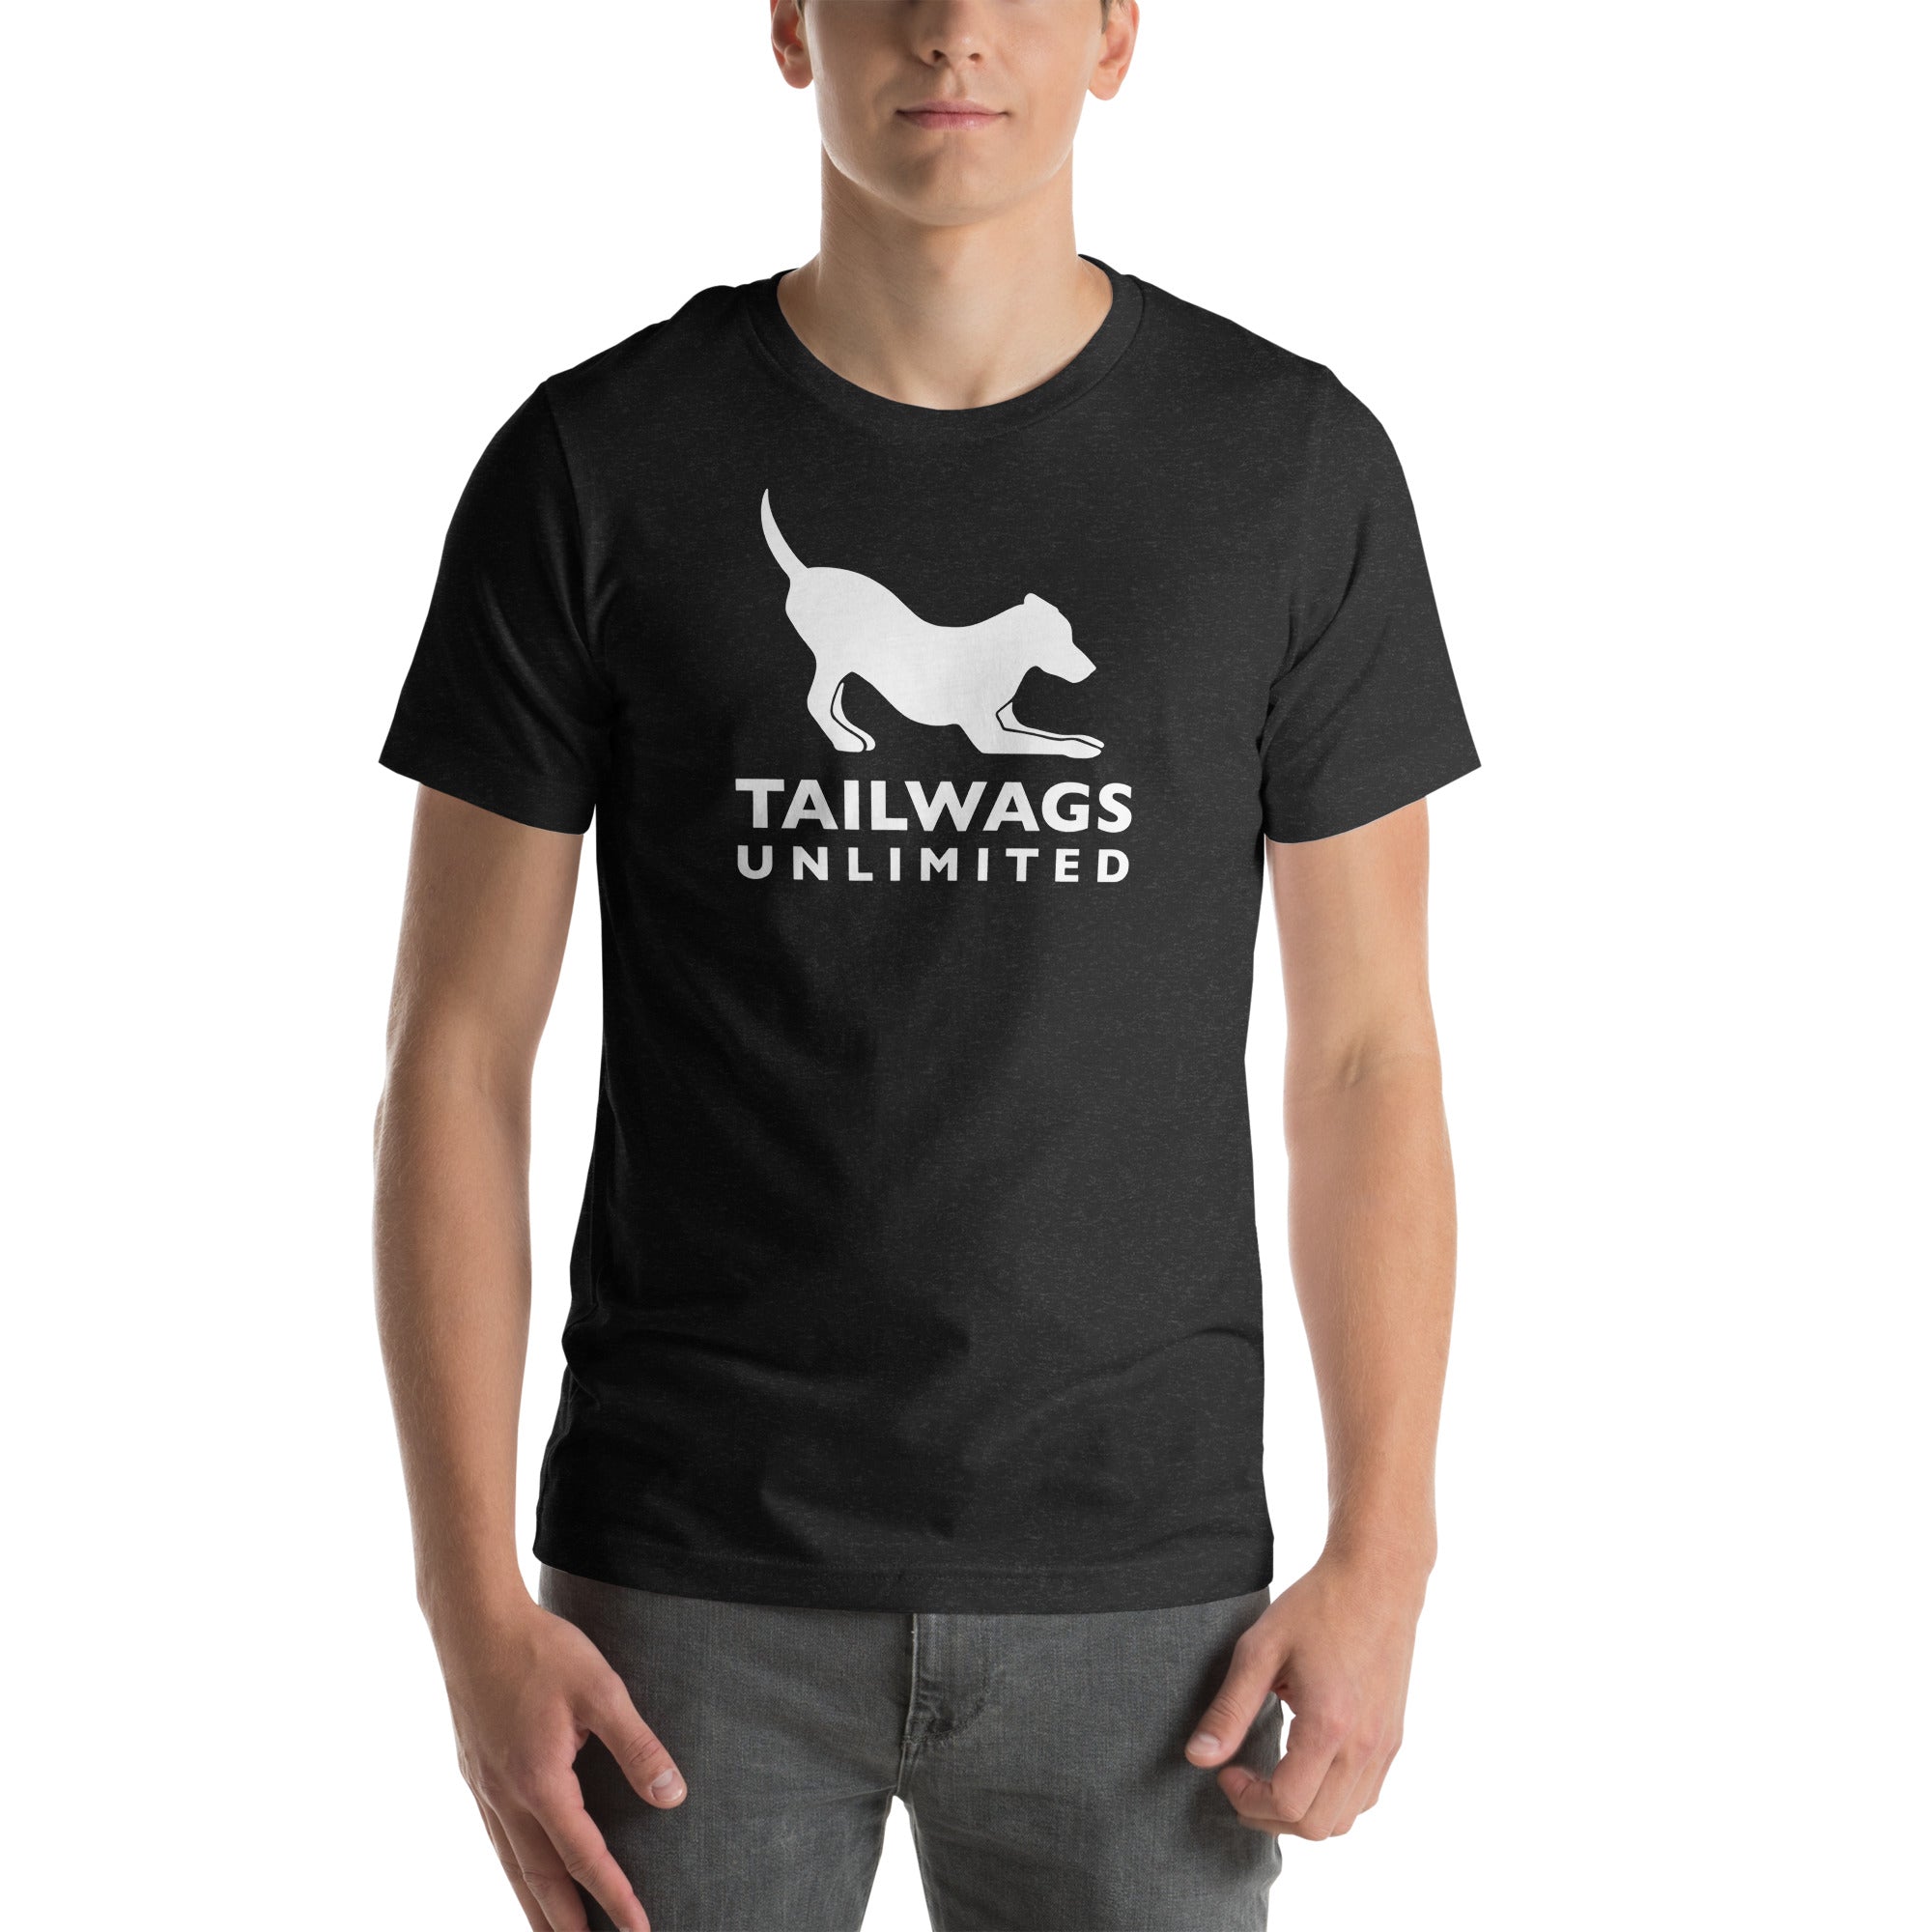 White Logo T-Shirt - TAILWAGS UNLIMITED